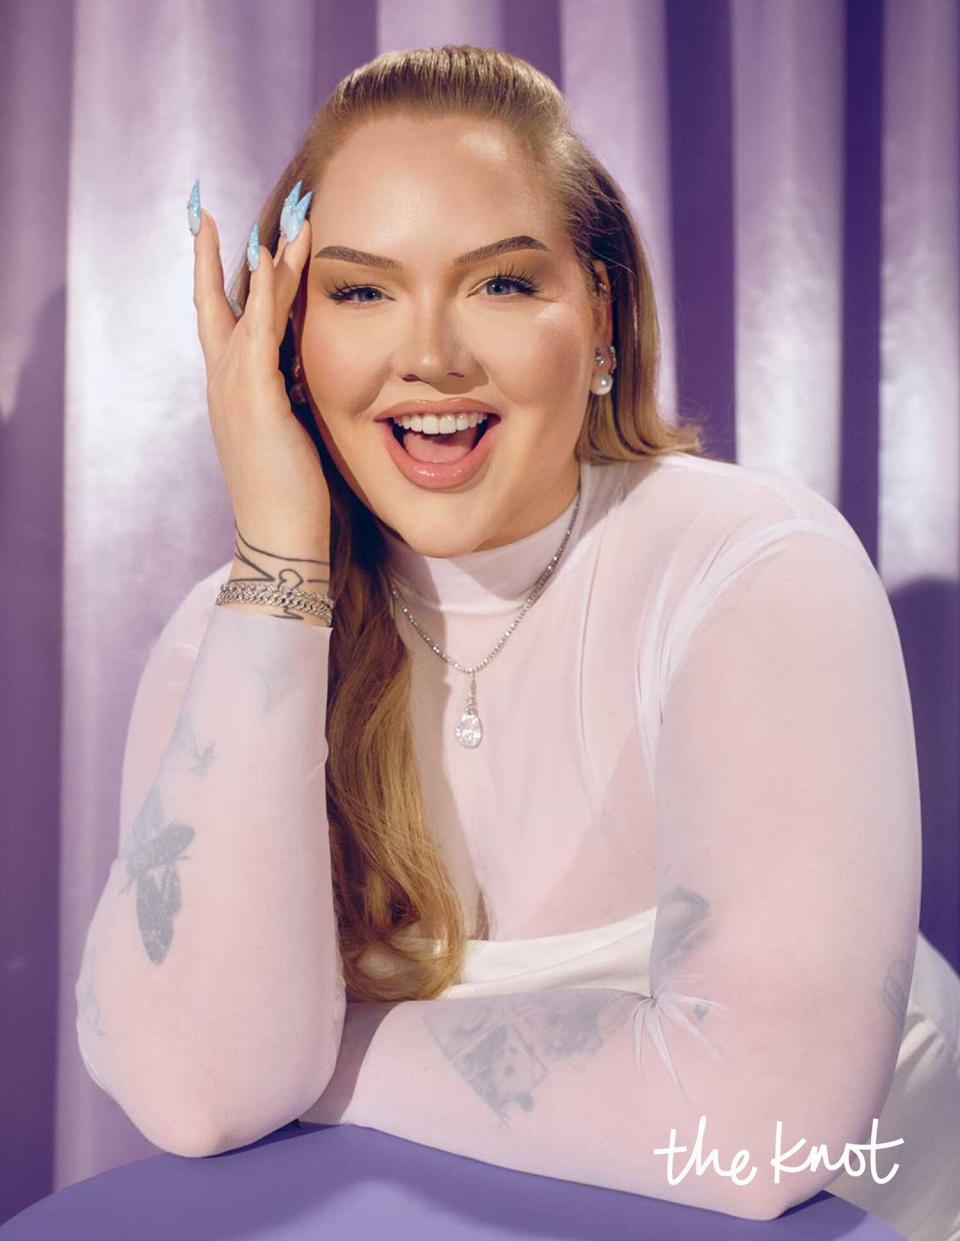 YouTube Beauty Sensation NikkieTutorials Debuts in The Knot Magazine as the Fall 2022 Issue Cover Star